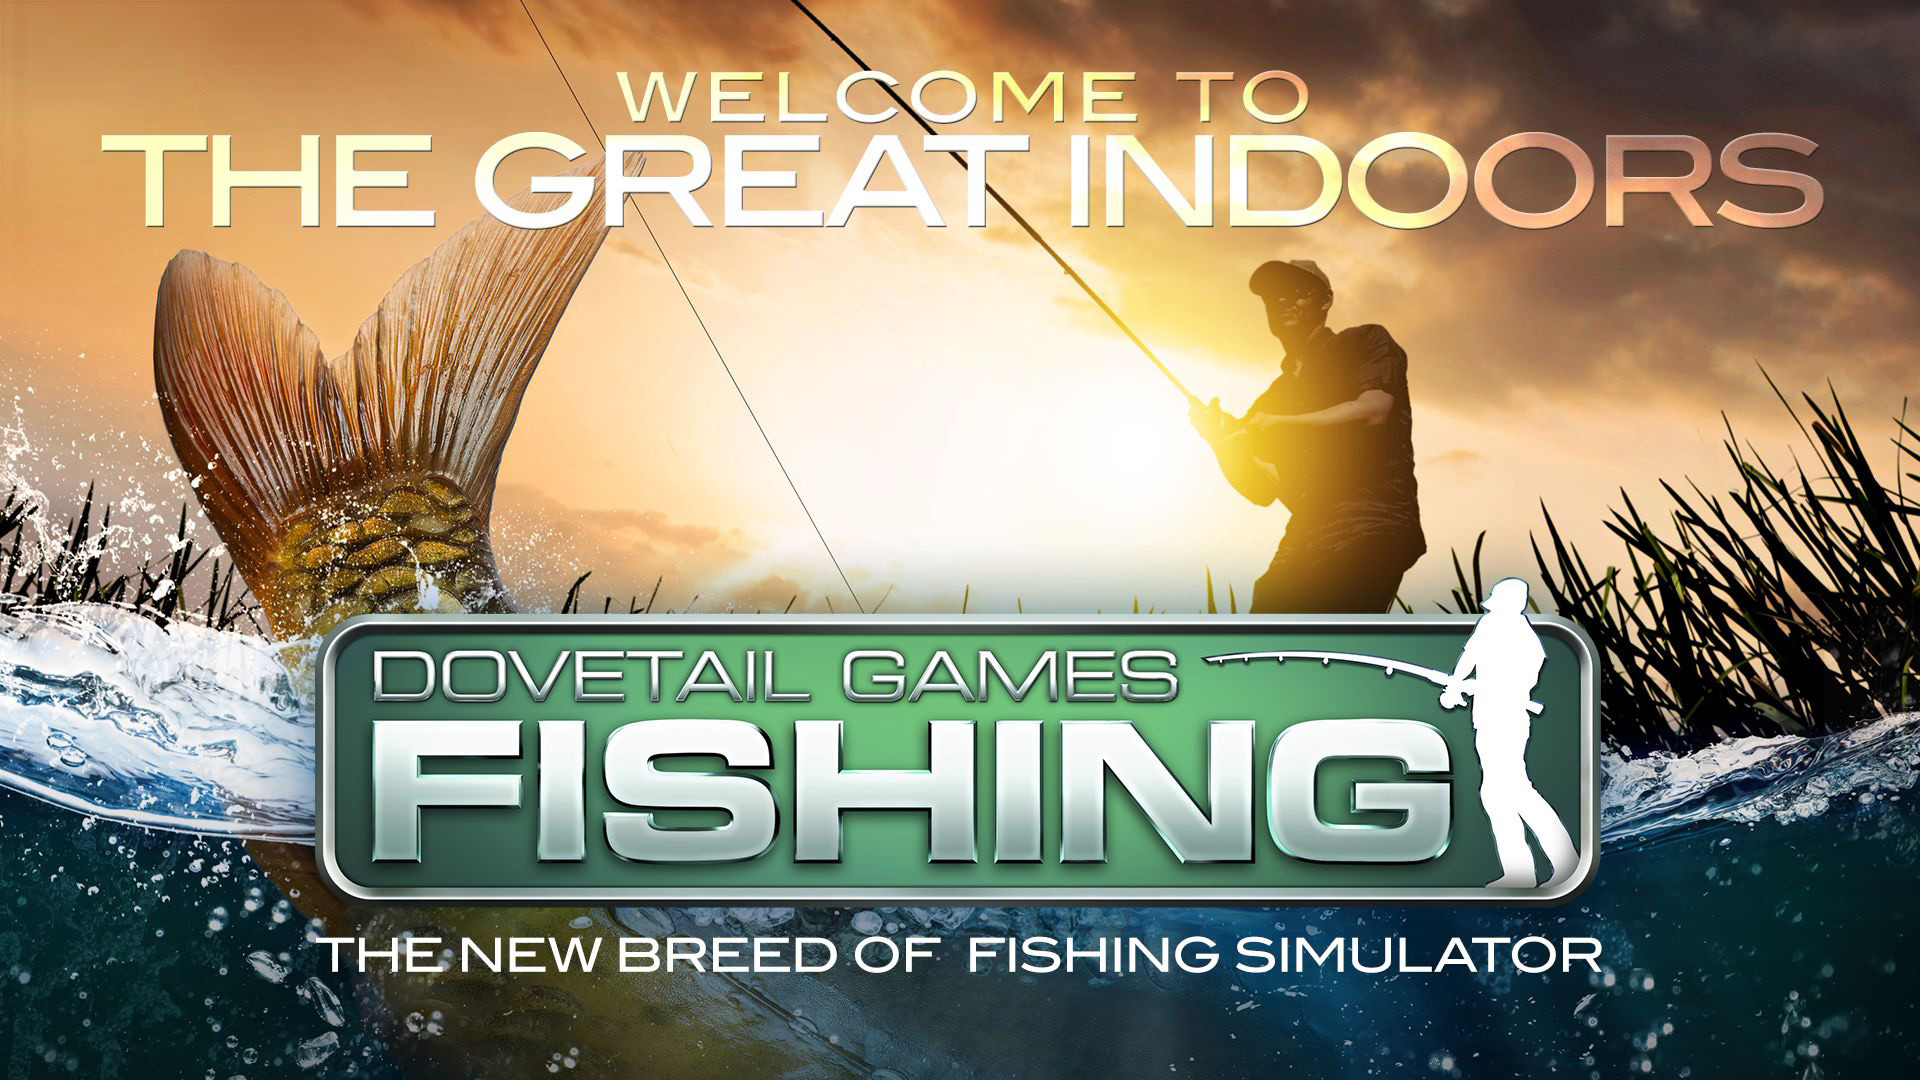 https://www.dsogaming.com/wp-content/uploads/2014/07/Dovetail-Games-Fishing-feature.jpg